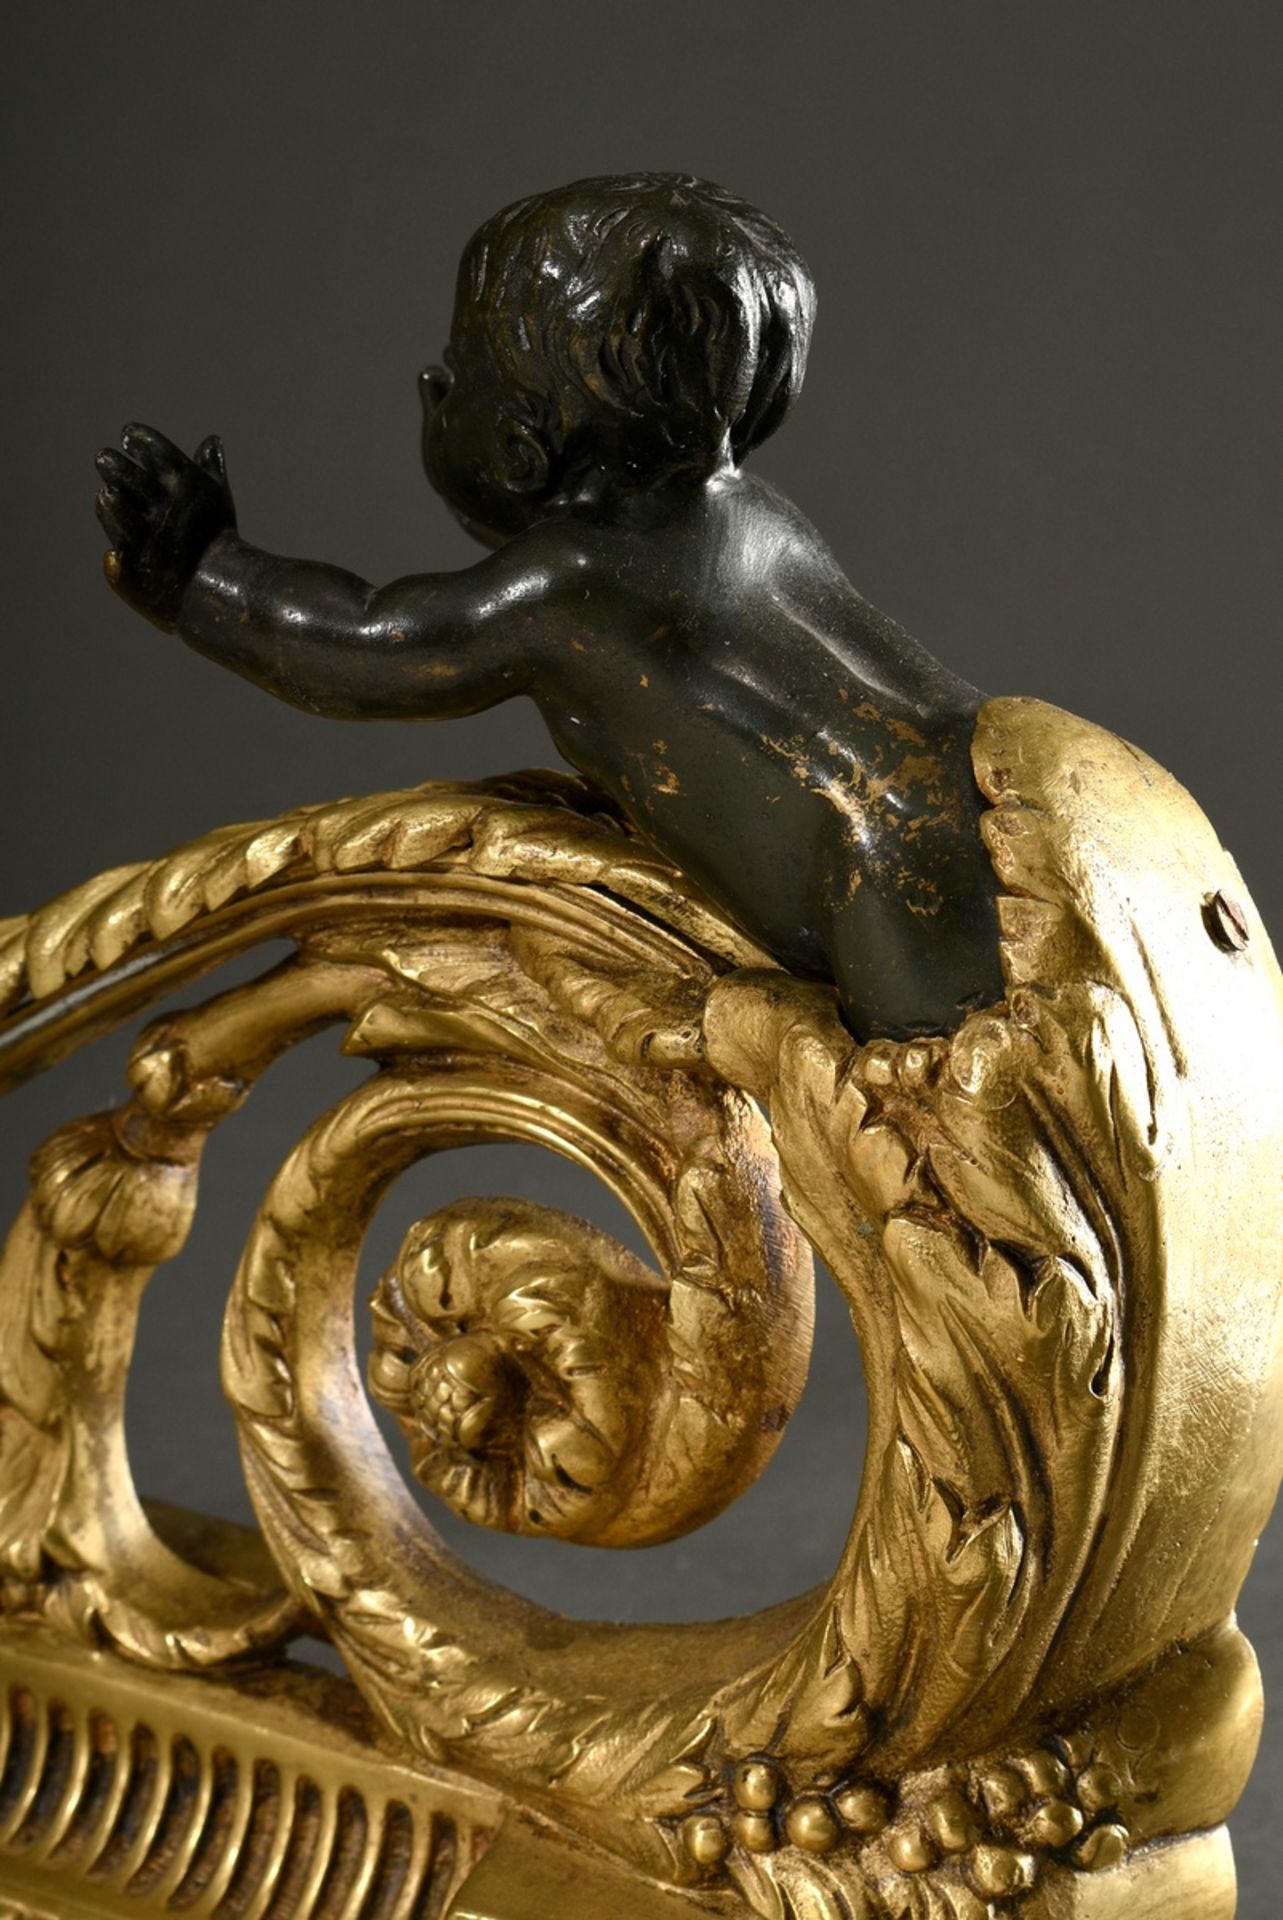 French brass mantelpiece in Louis XVI style with leaf volutes, flame vases and laurel wreath motif, - Image 5 of 7